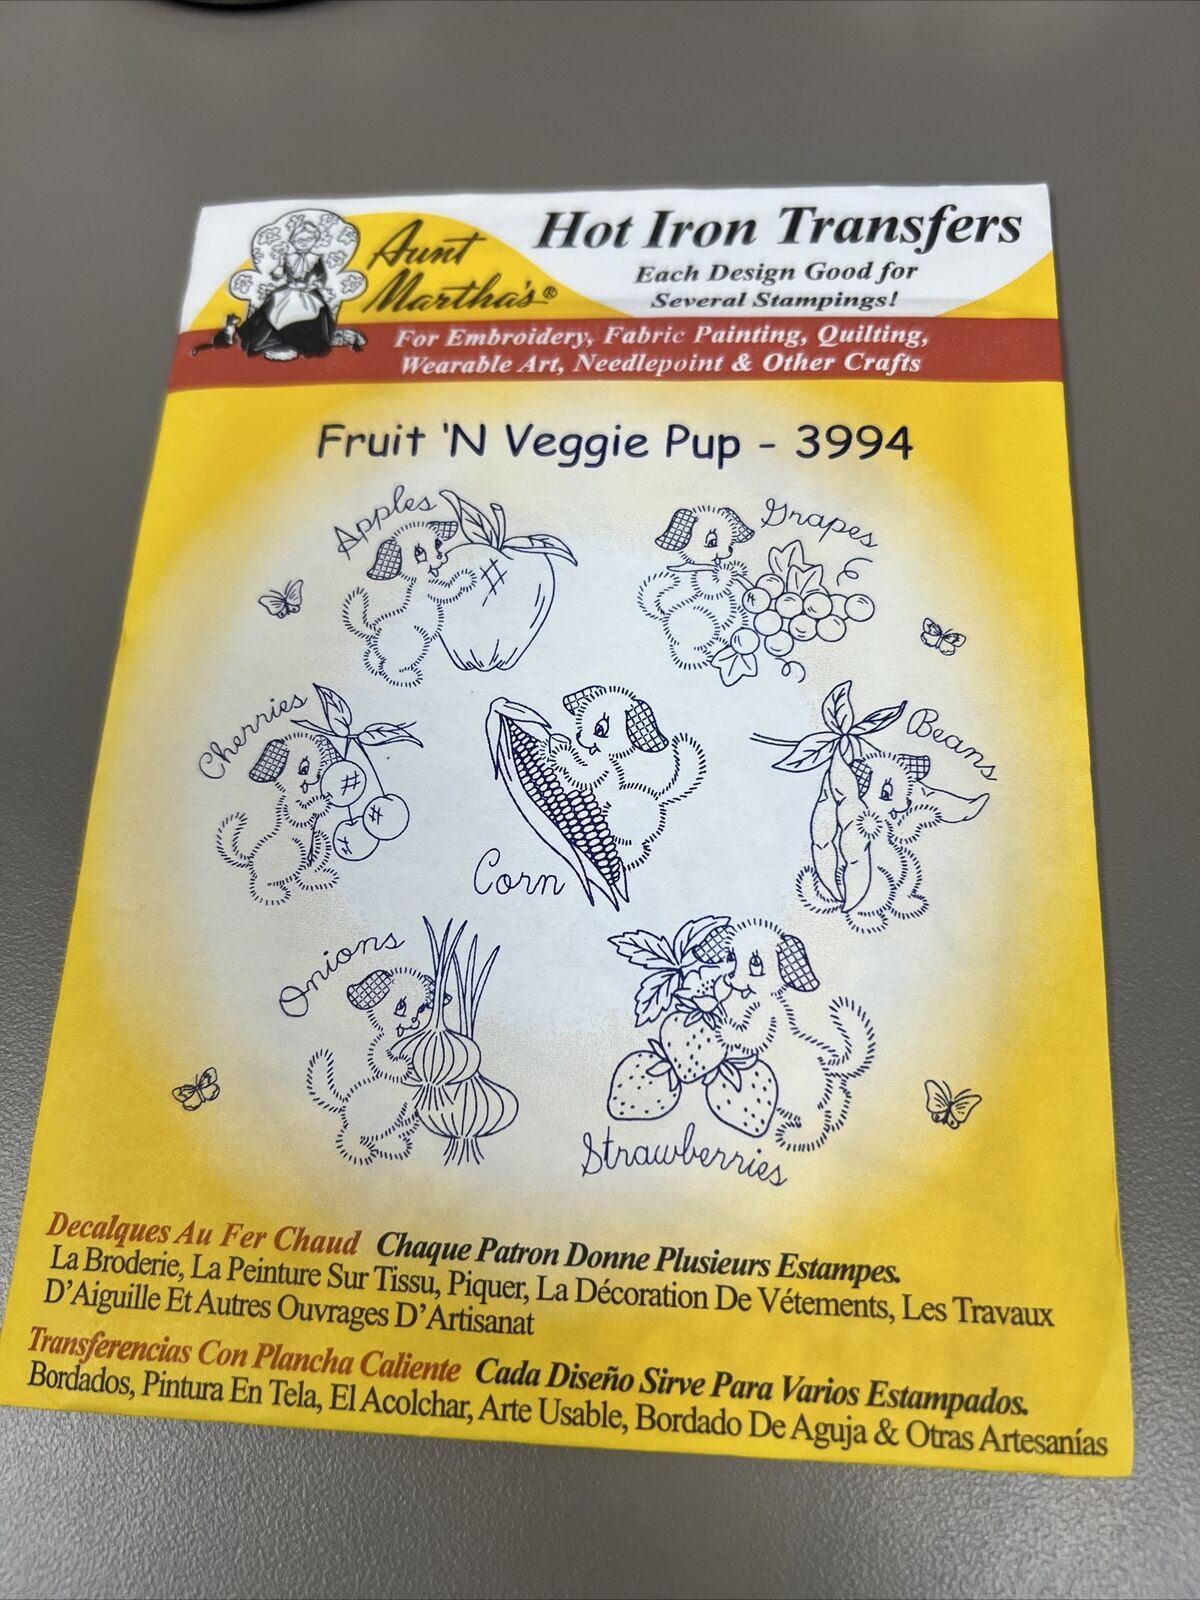 Vintage Aunt Martha\'s Hot Iron Transfer Embroidery 3994 Fruit ‘N veggie Pup NEW